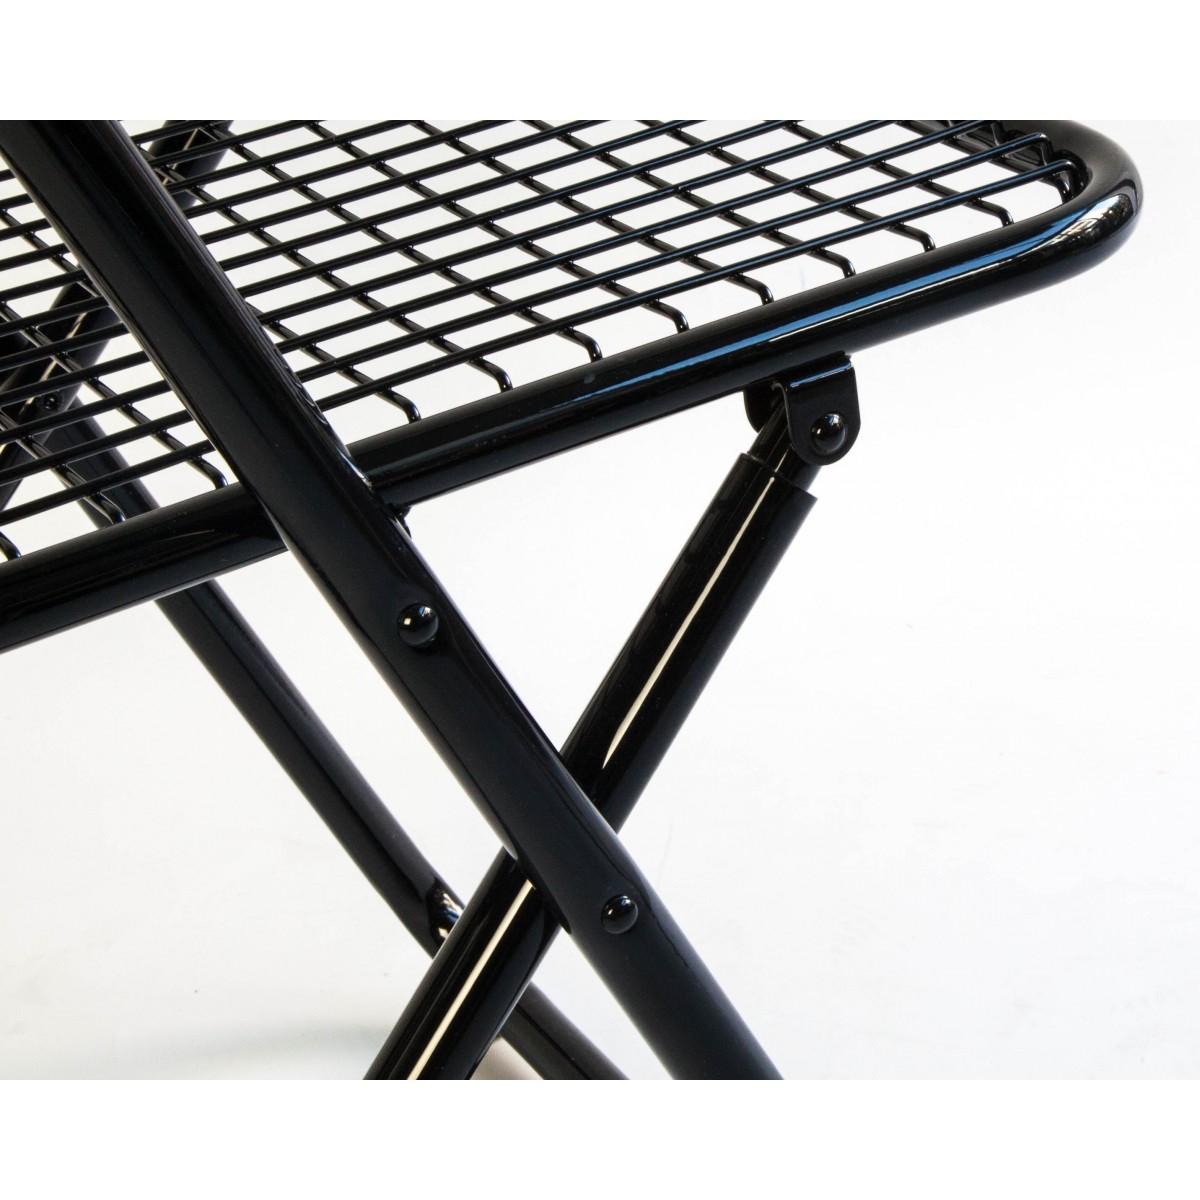 New Folding Iron Chair Black by Houtique signed by Federico Giner, Spain 3